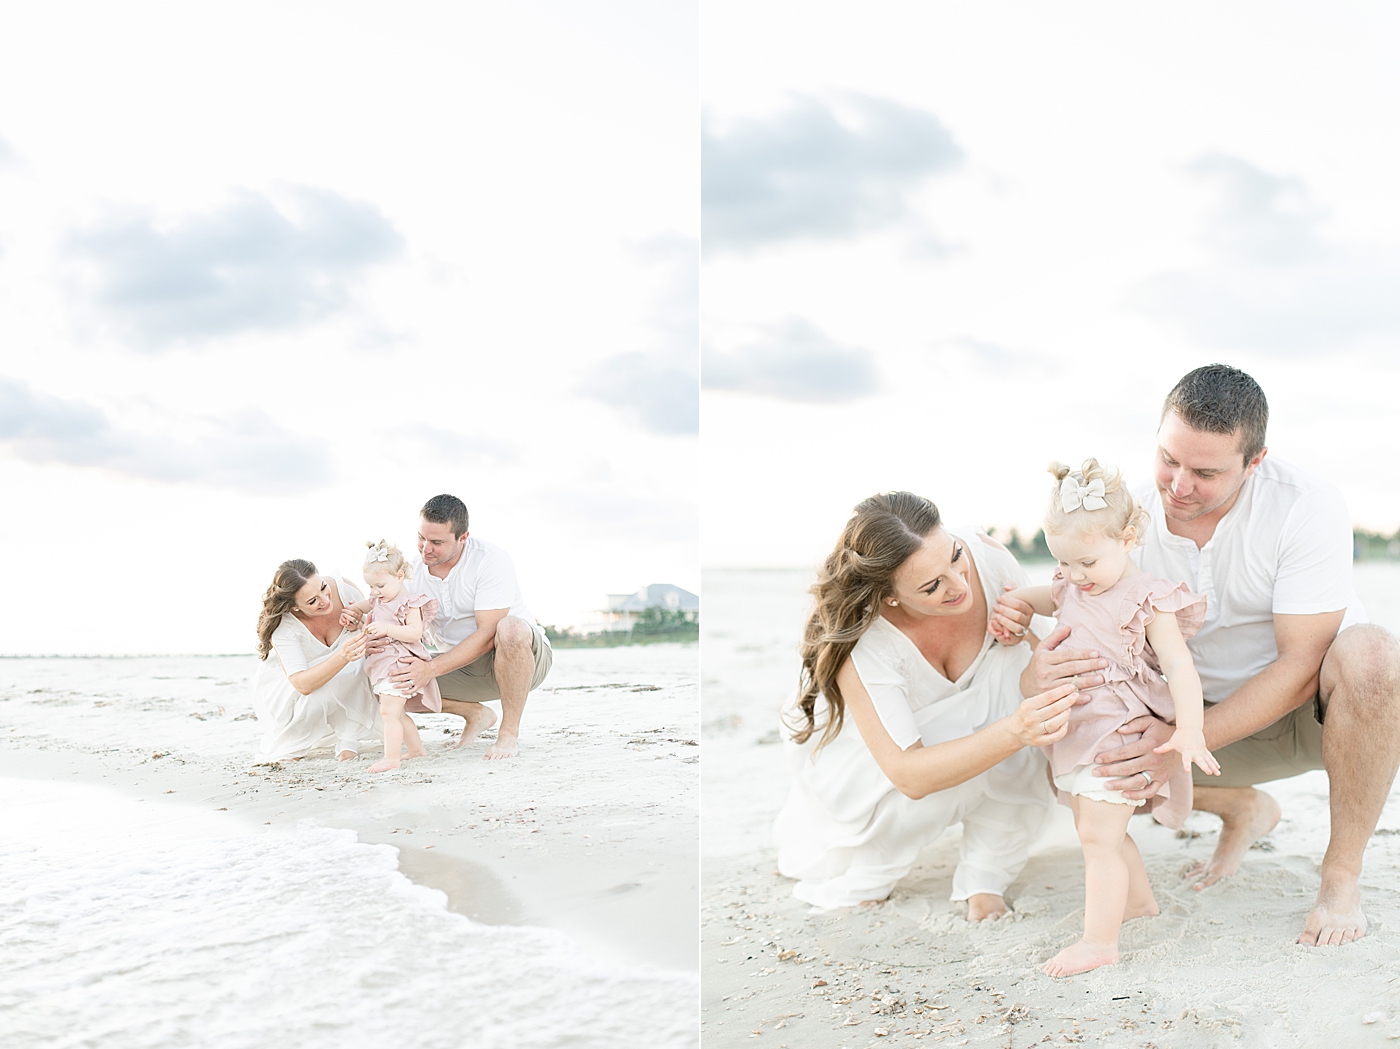 Mom and dad helping baby girl find shells on the beach | Photo by Little Sunshine Photography